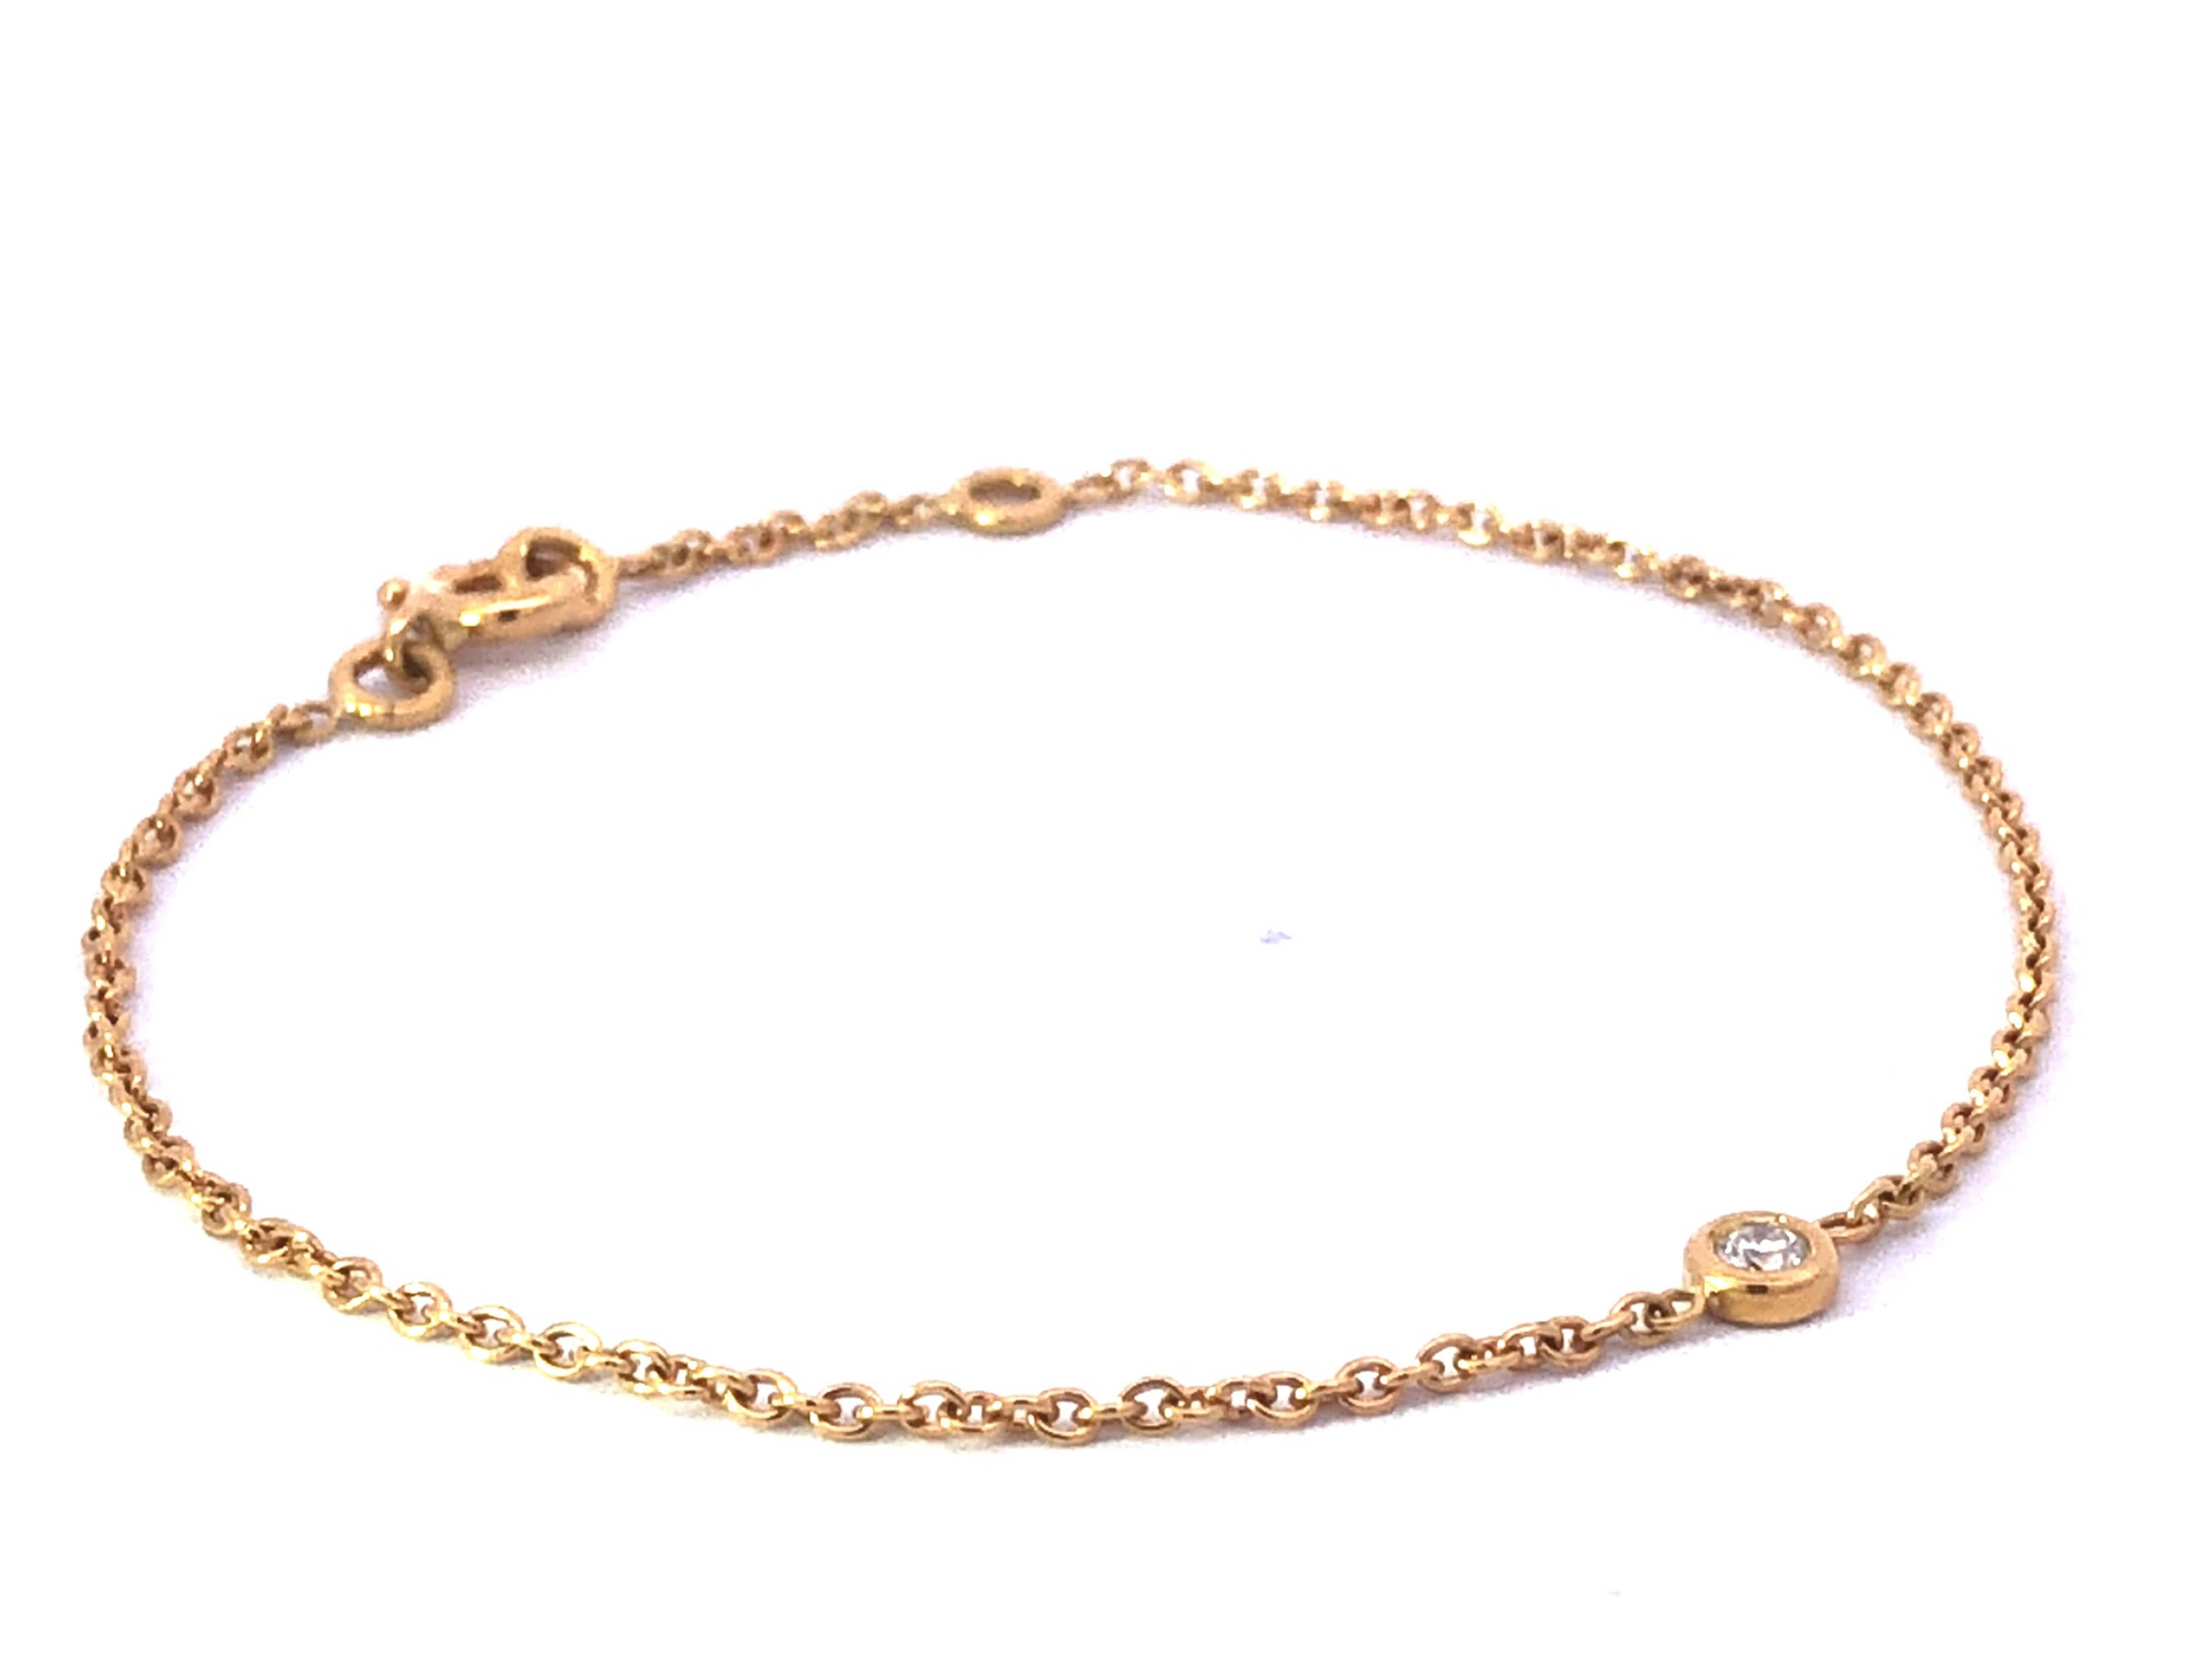 Vintage Dior Diamonds by the Yard Adjustable Bracelet in 18k Yellow Gold In Excellent Condition For Sale In Honolulu, HI